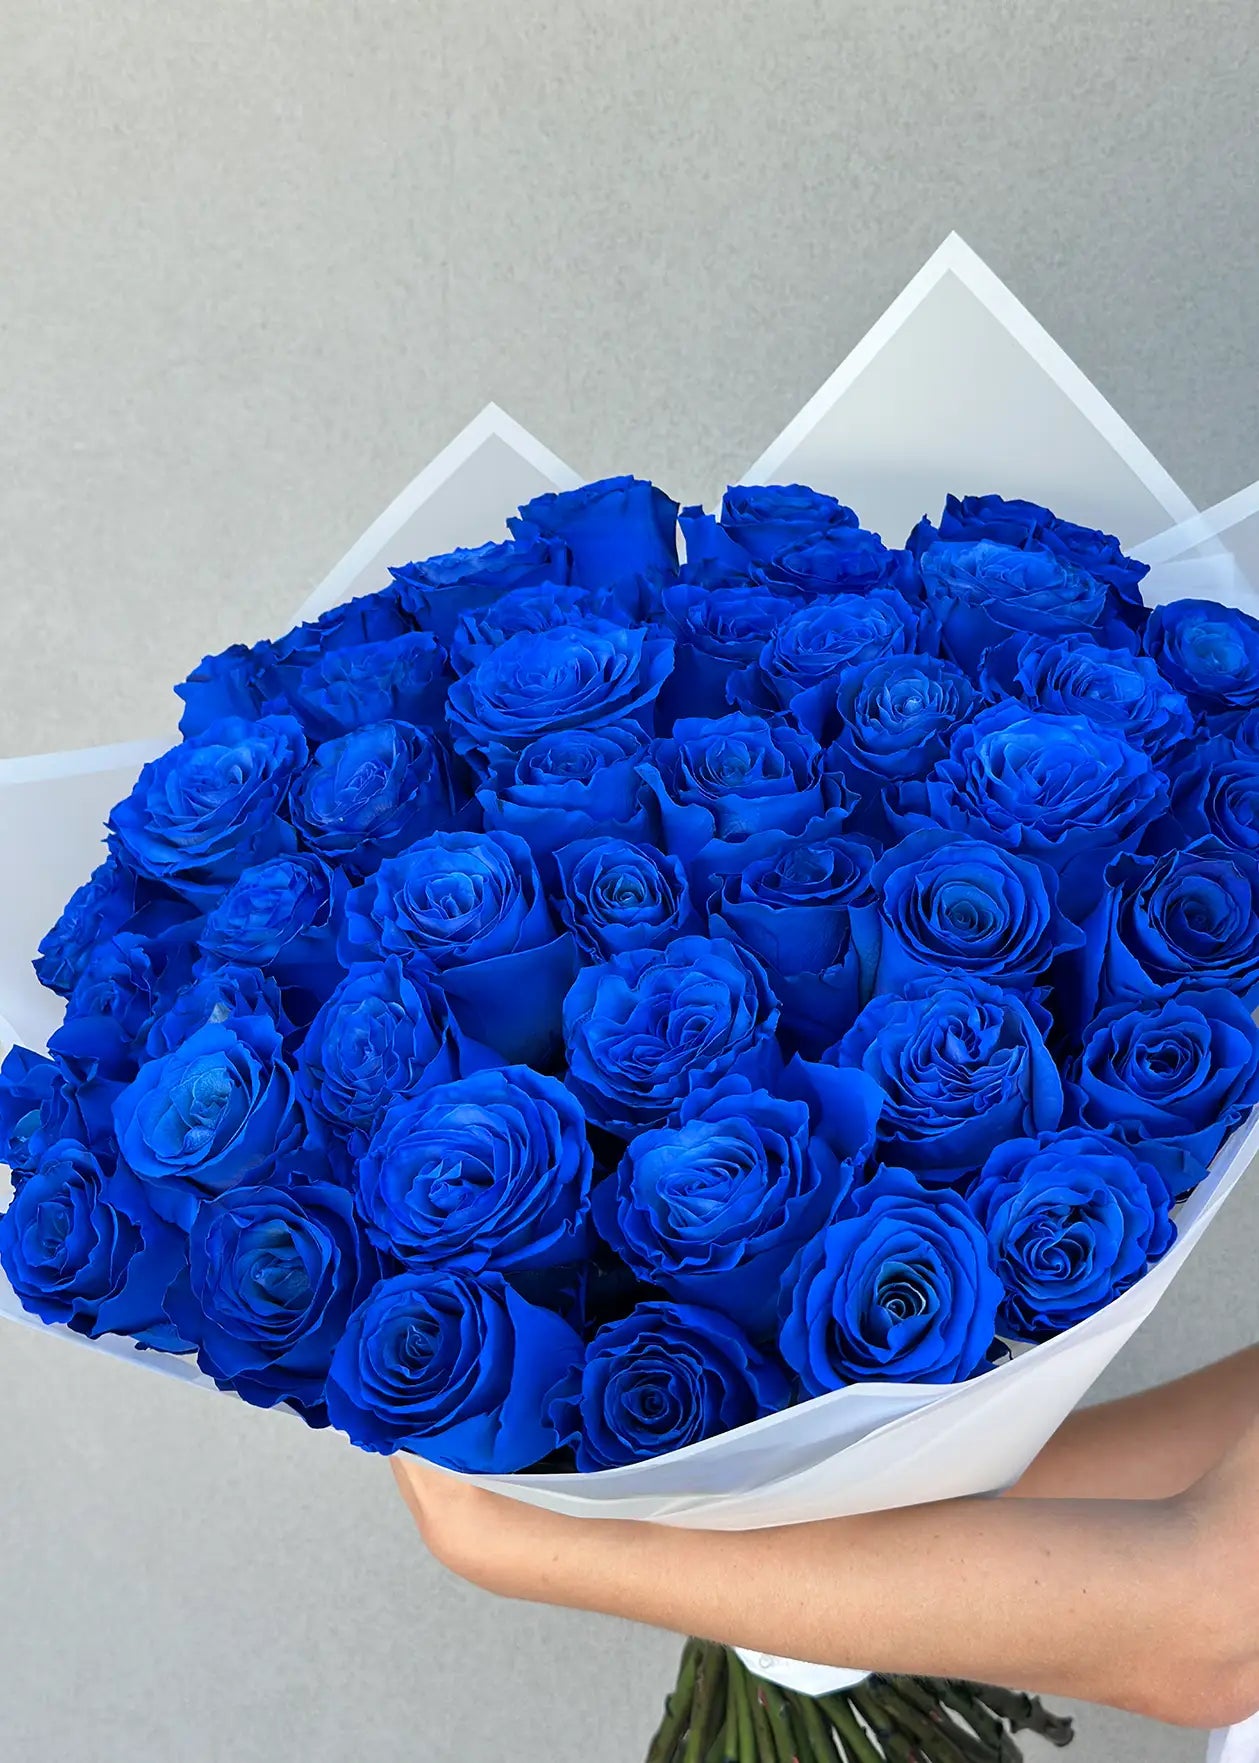 NO. . Blue Bridal Bouquet   Cherry Blossom   Flowers Delivery in LA